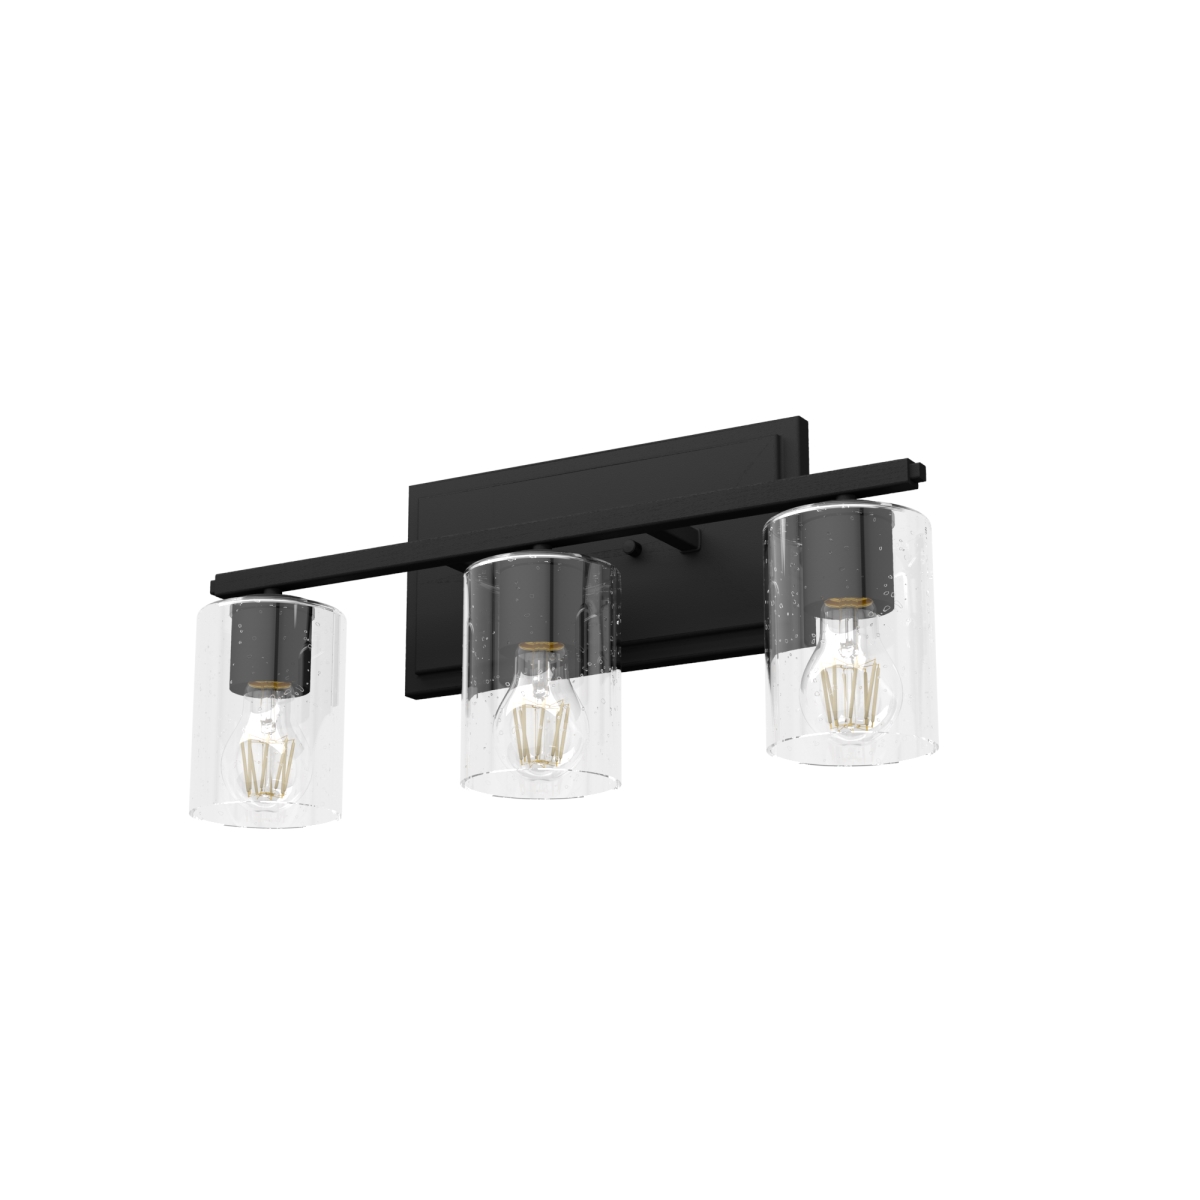 Picture of Hunter 48030 9.5 in. Kerrison Natural Black Iron with Seeded Glass 3 Light Bathroom Vanity Wall Light Fixture